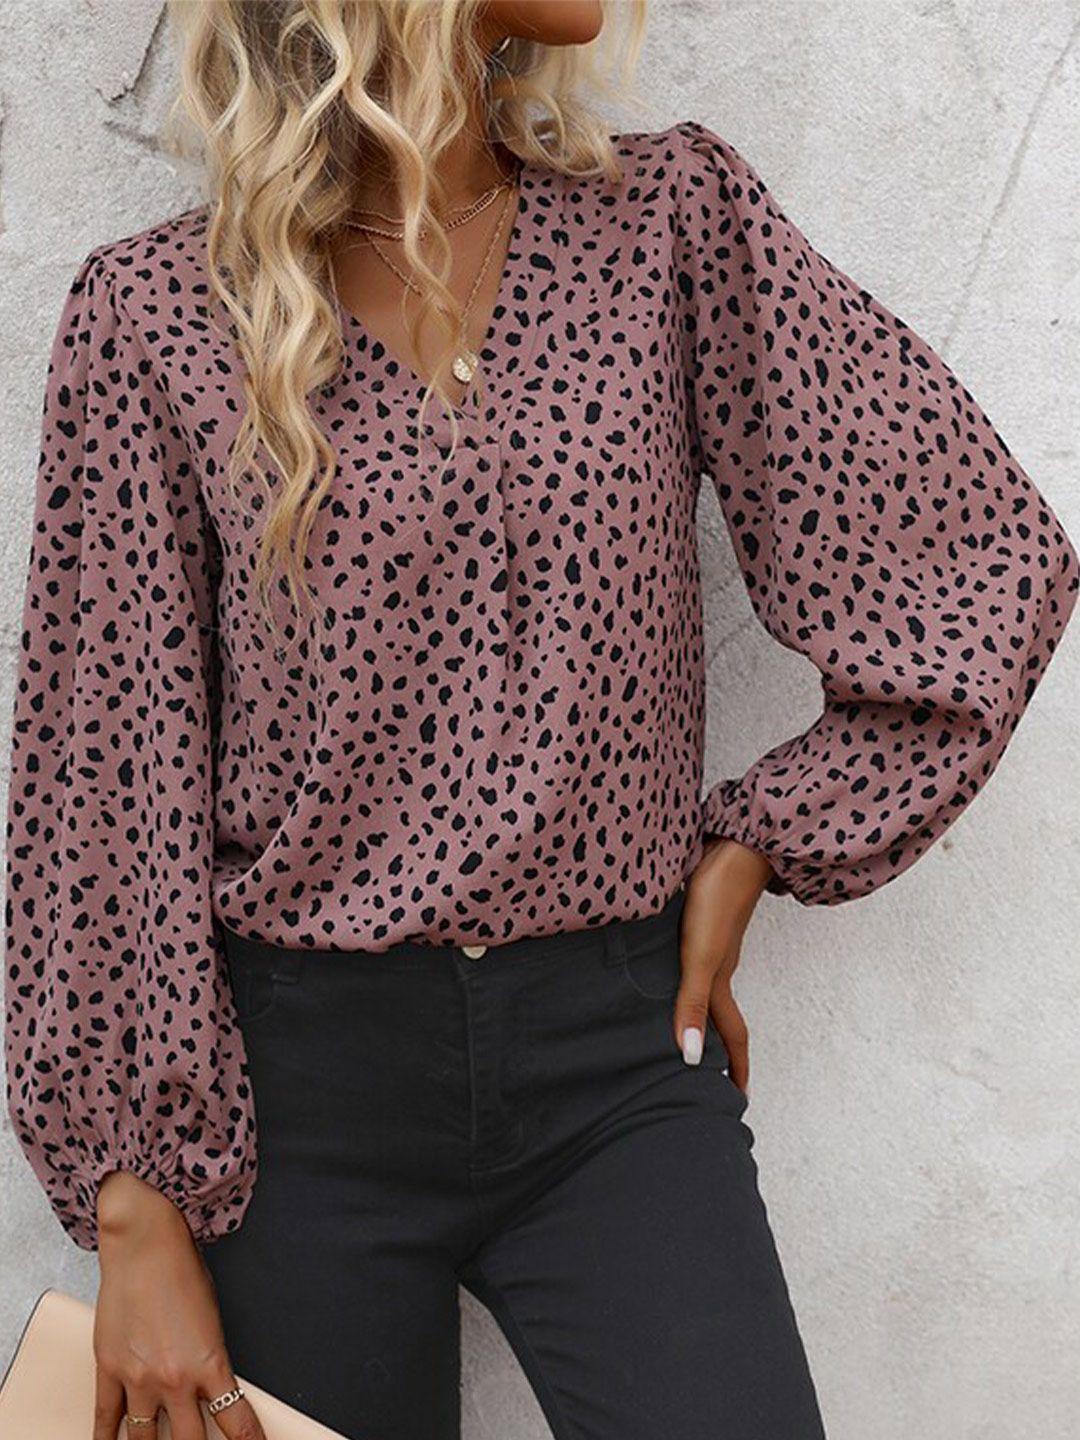 stylecast-pink-animal-printed-puff-sleeves-shirt-style-top